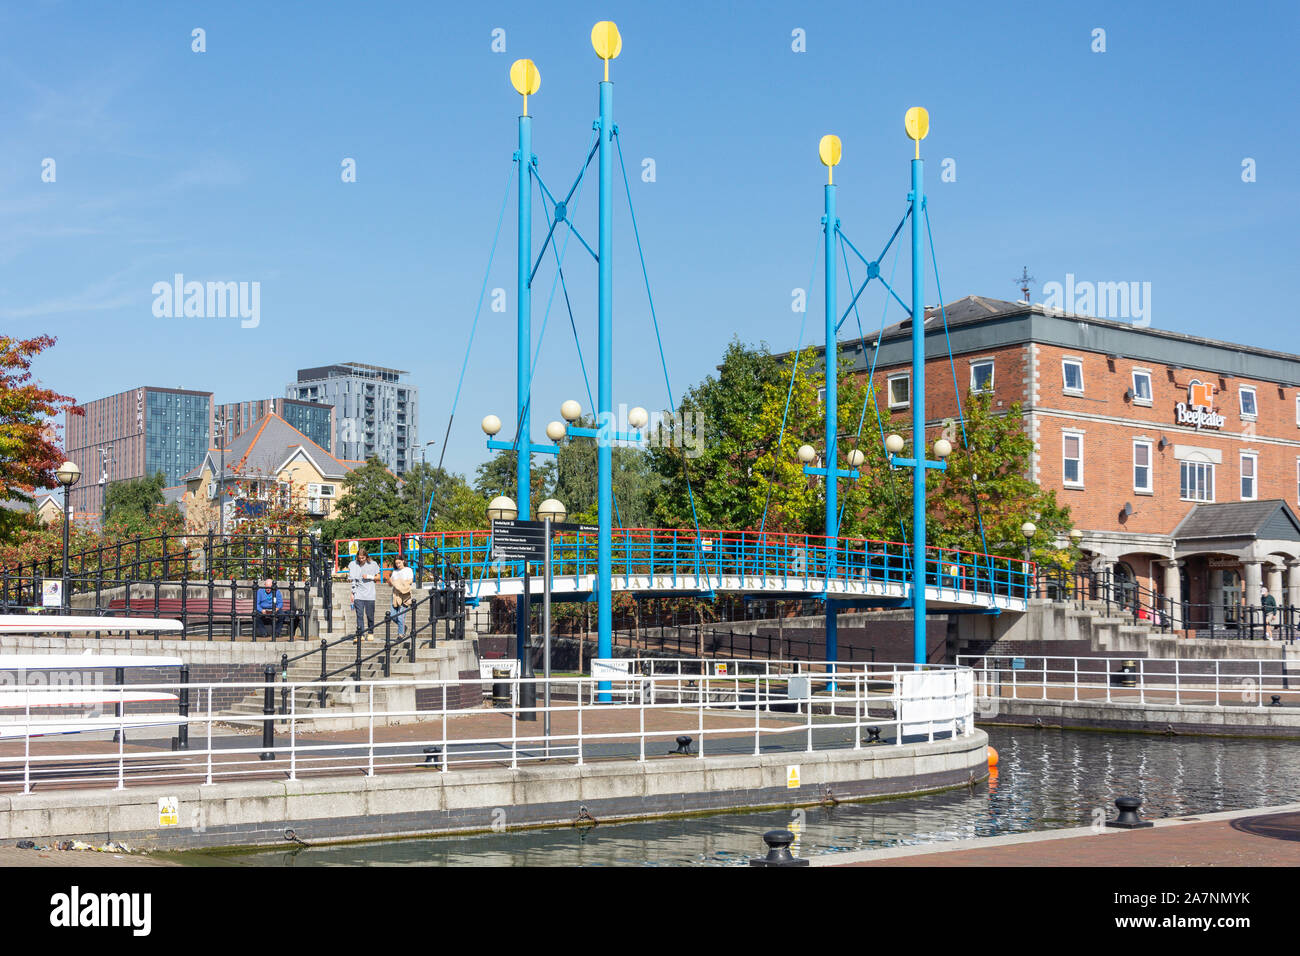 Mariner's Canal, Salford Quays, Salford, Greater Manchester, England, United Kingdom Stock Photo